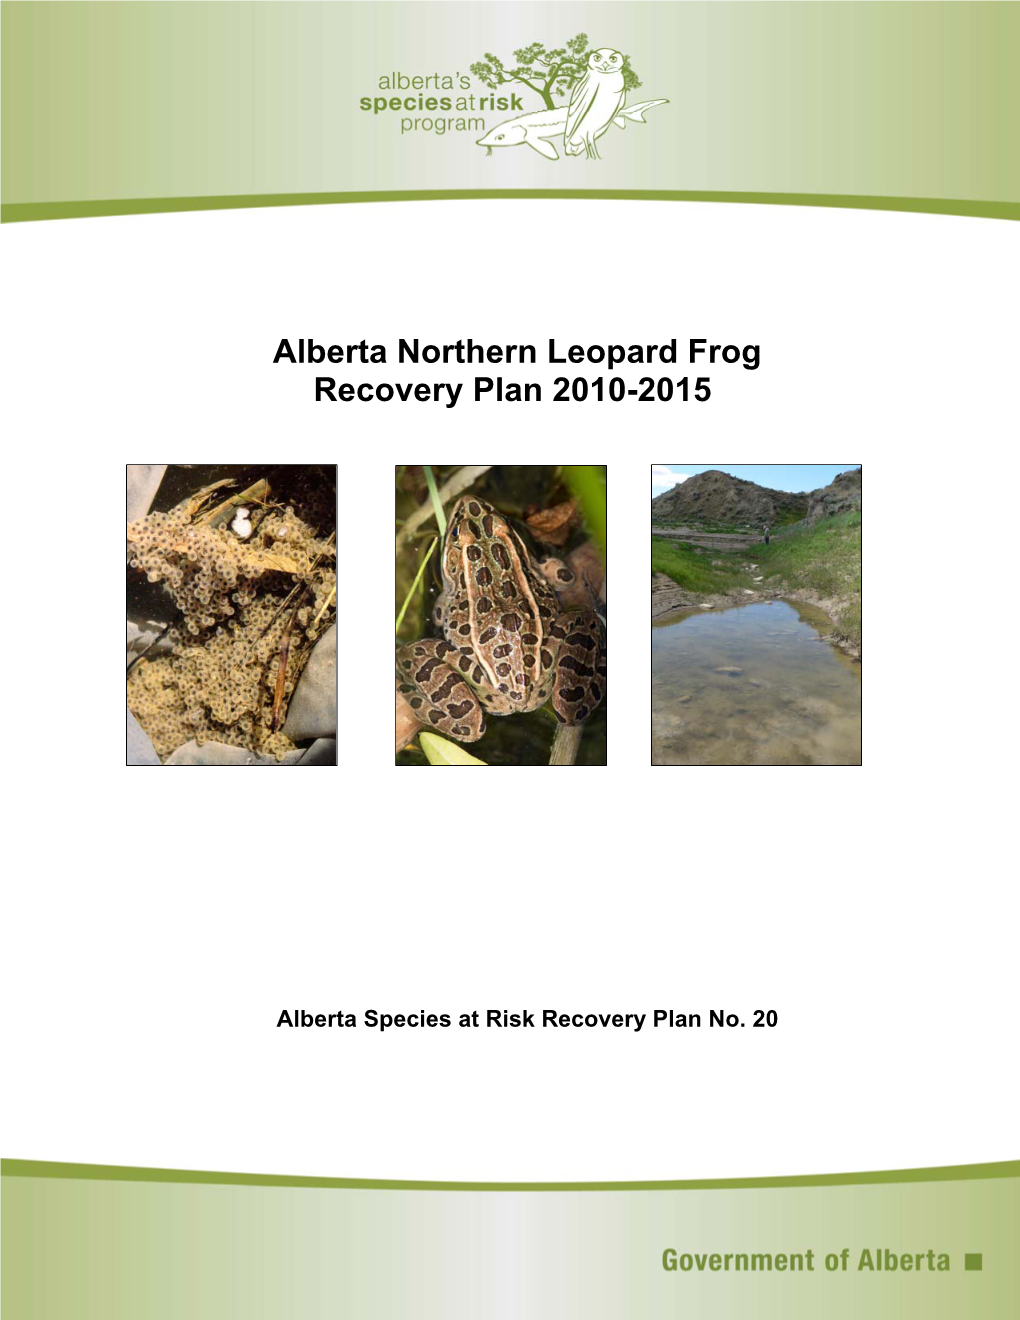 Alberta Northern Leopard Frog Recovery Plan 2010-2015